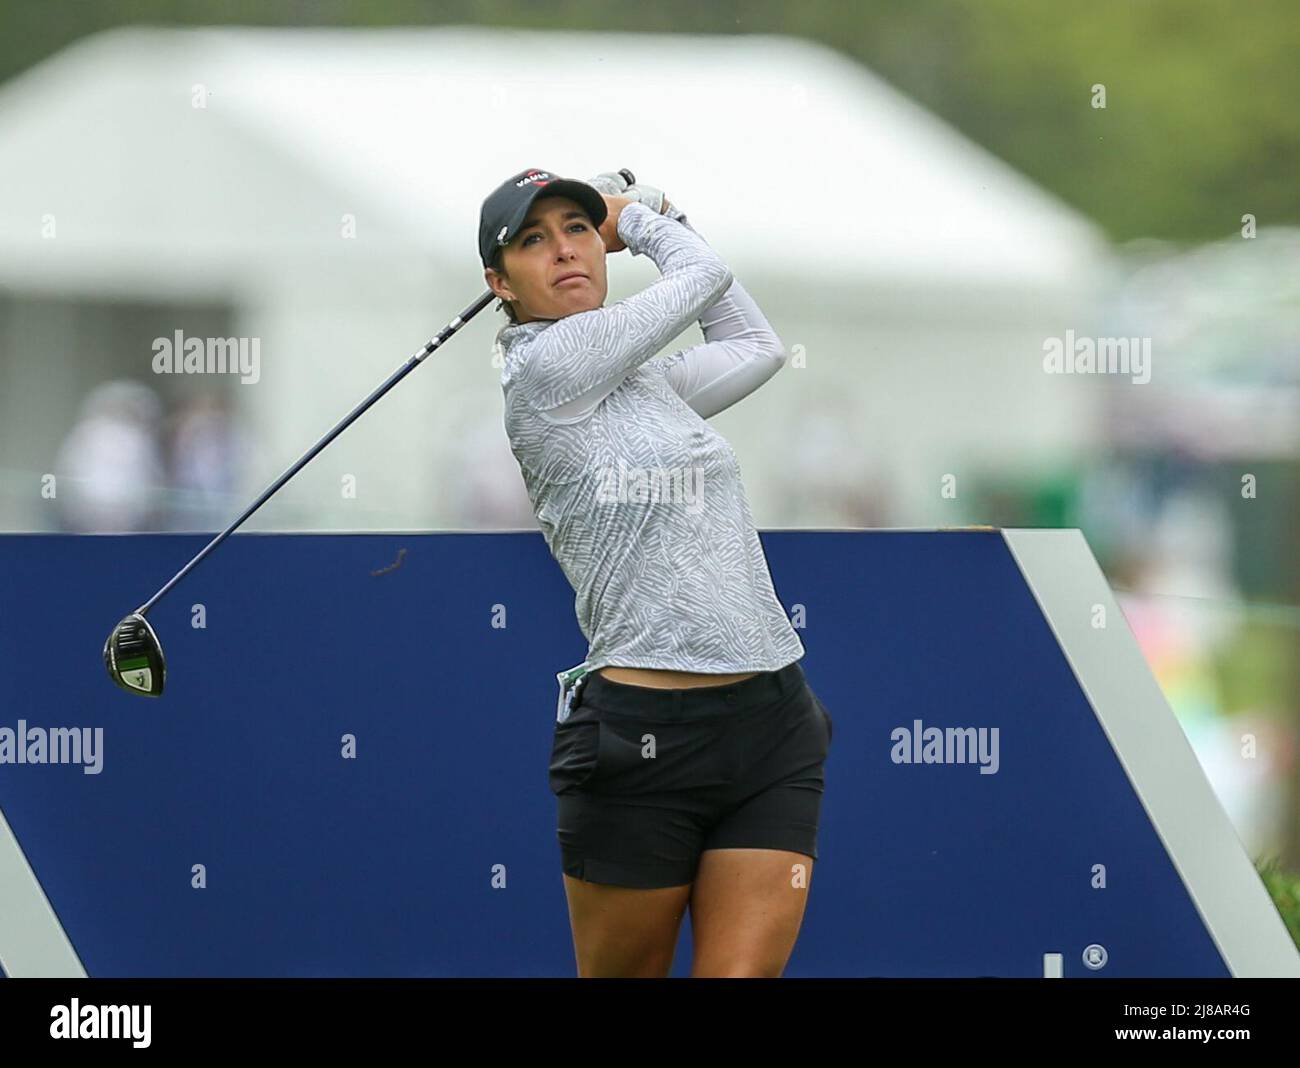 Clifton, NJ, USA. 14th May, 2022. Jaye Marie Green watches her tee shot during the third round of the LPGA Cognizant Founders Cup at the Upper Montclair Country Club in Clifton, NJ. Mike Langish/Cal Sport Media. Credit: csm/Alamy Live News Stock Photo